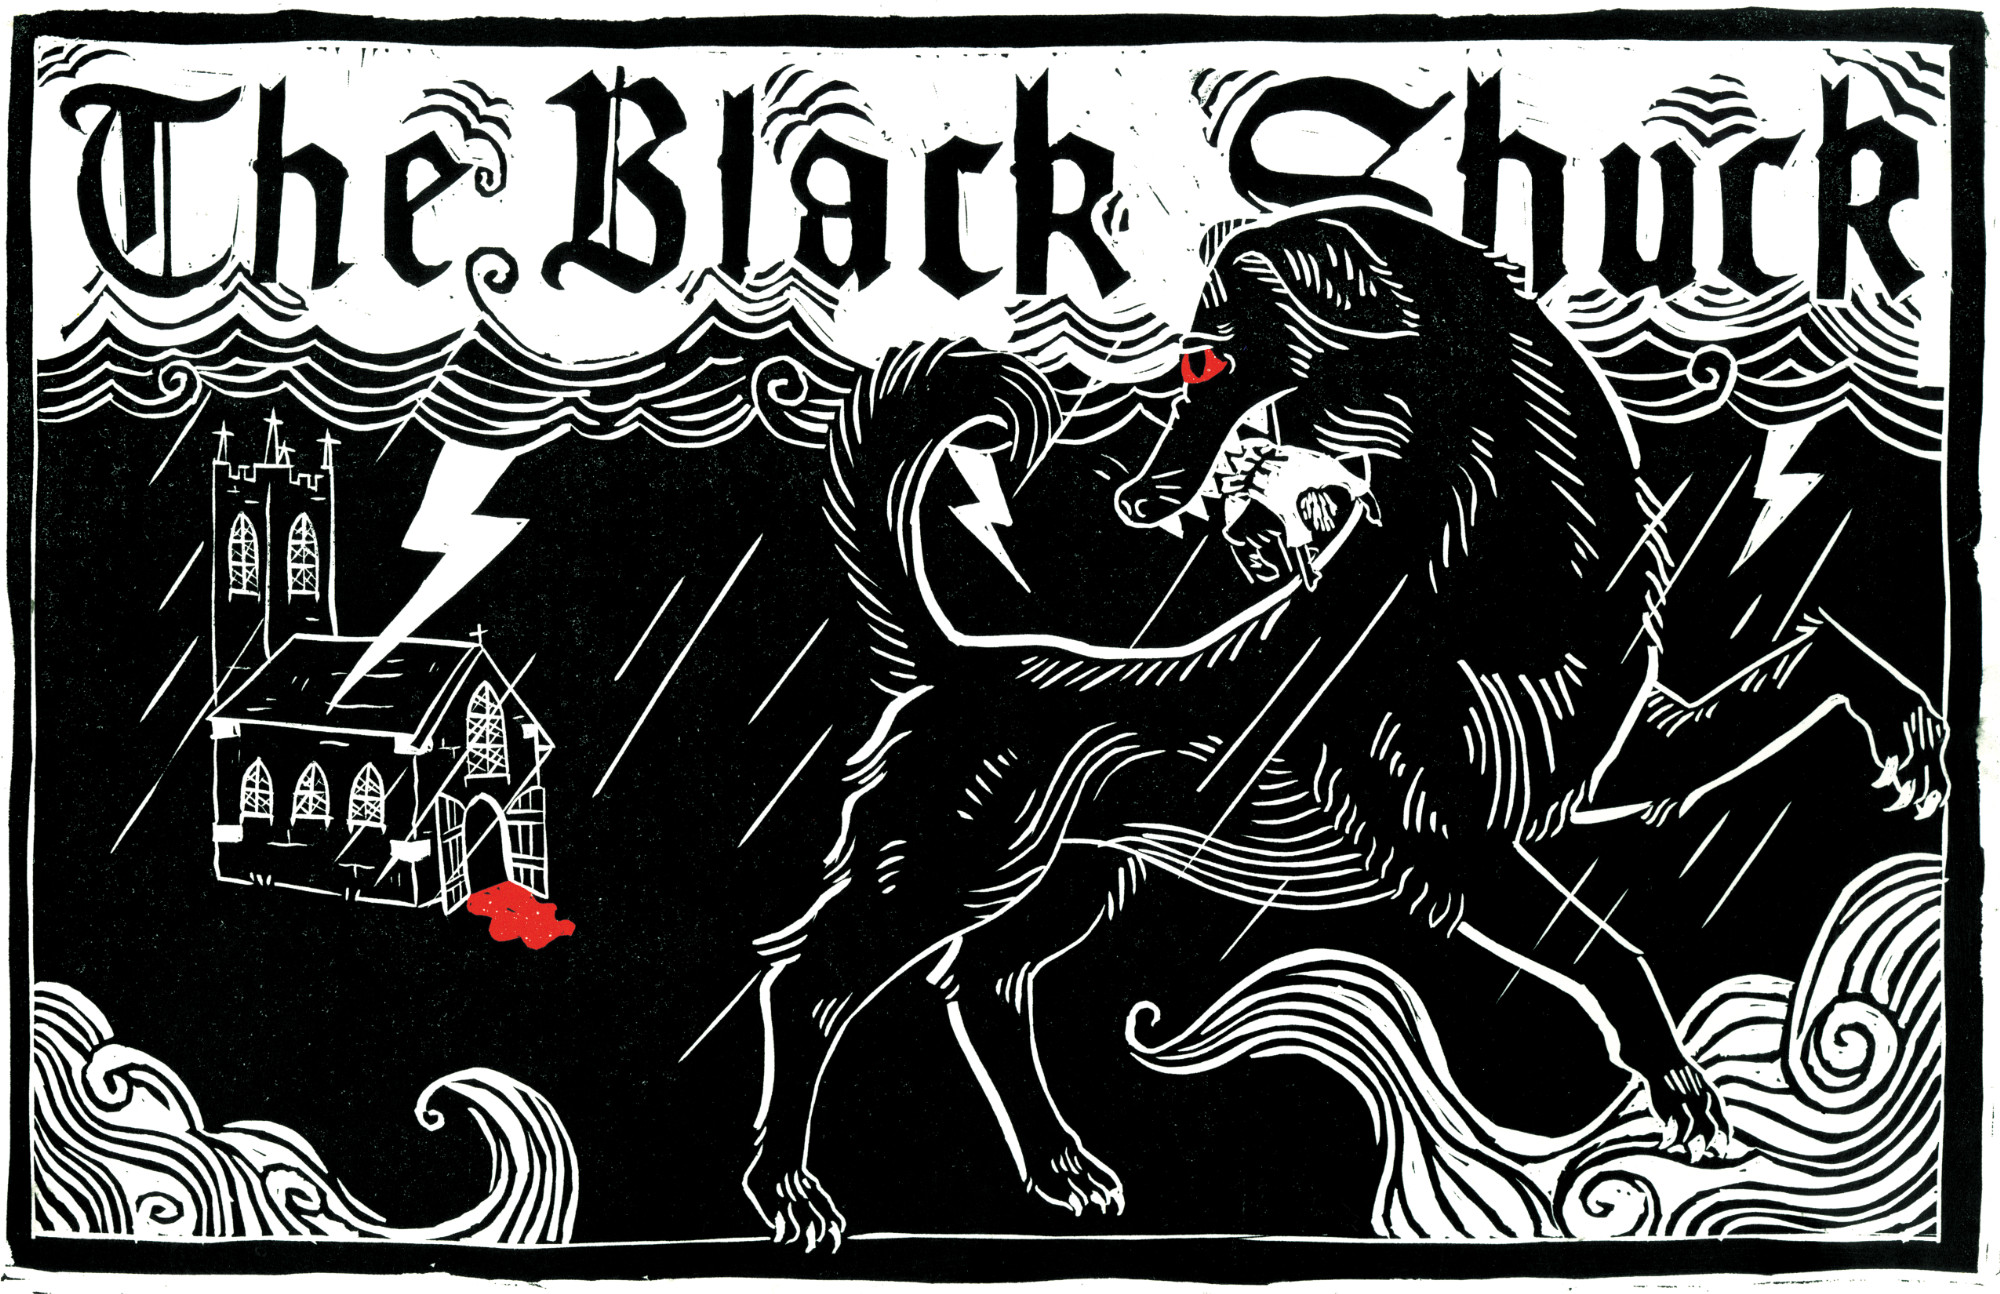 Black Shuck Linocut Print. Response to Folklore brief looking at the East Anglian story of the mythic blood hound, the black shuck.